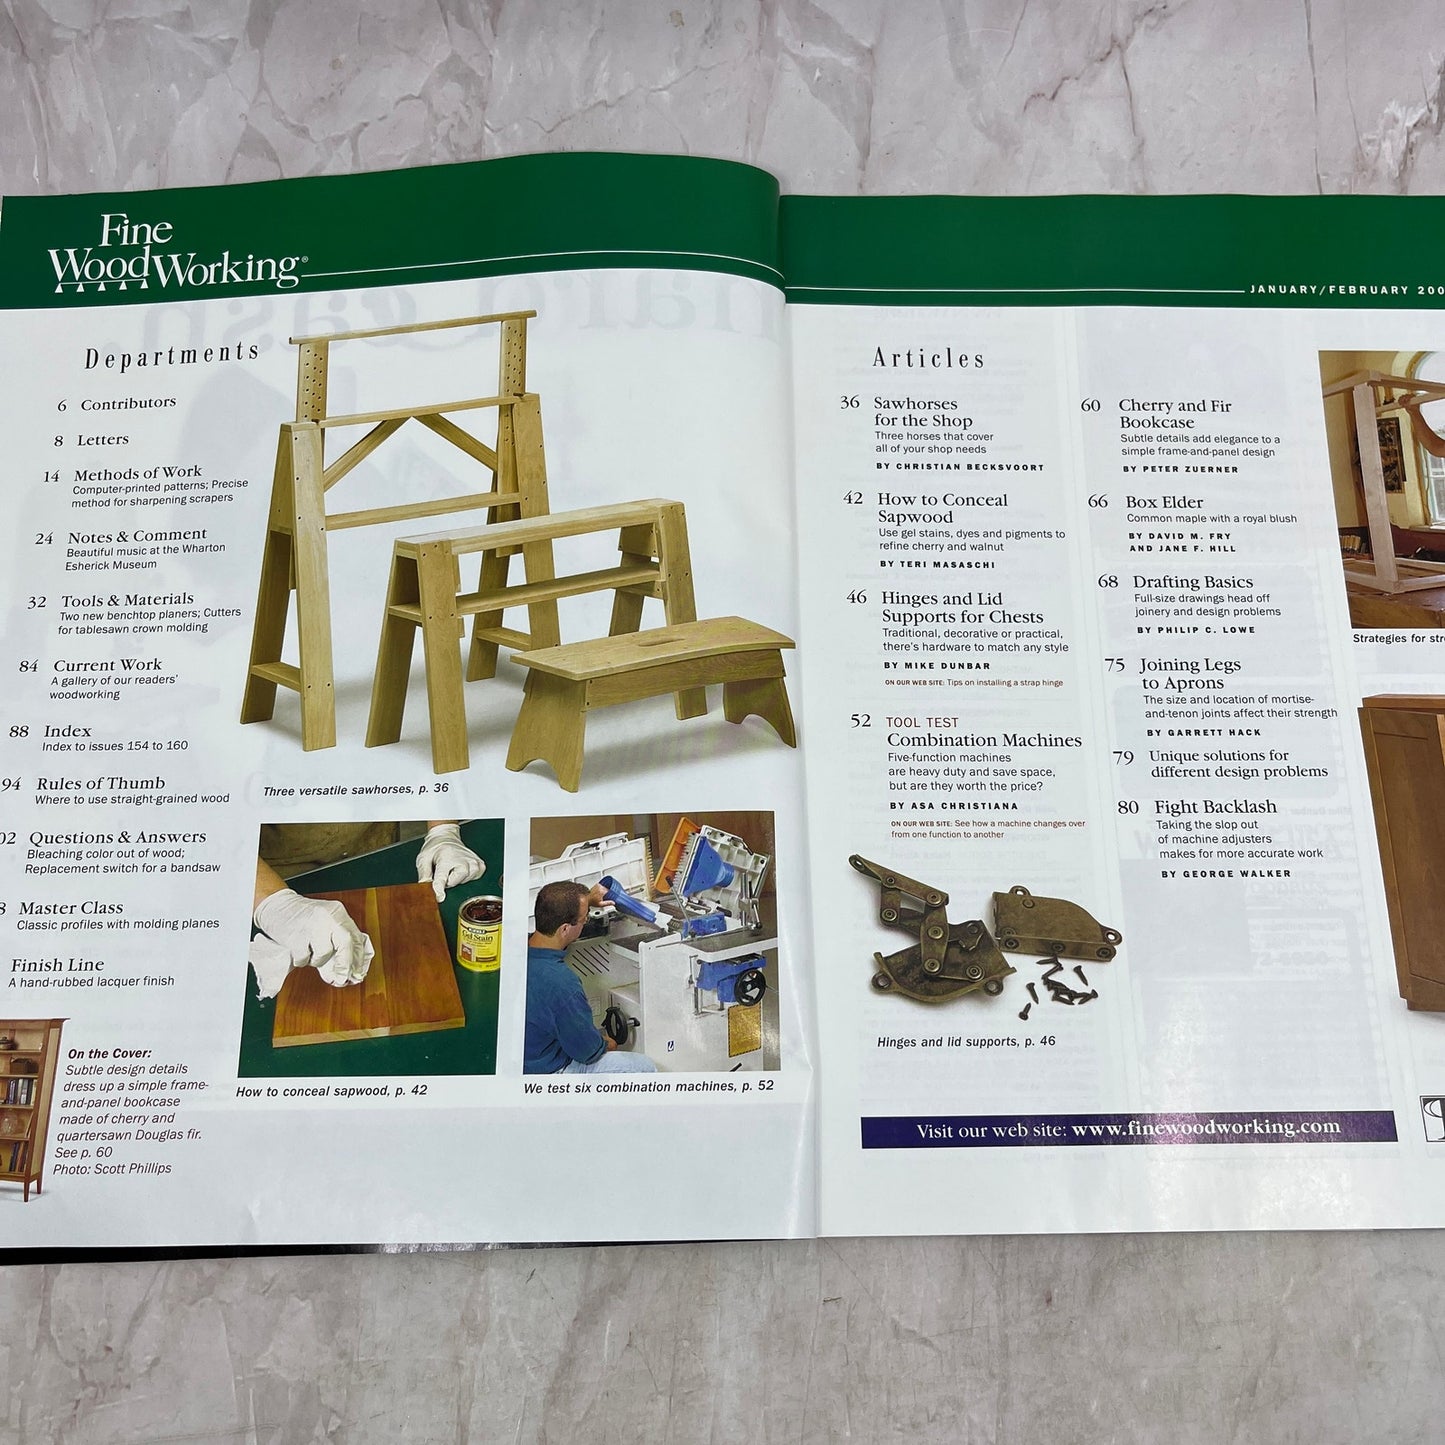 Frame-and-Panel Bookcase - Feb 2003 No 1619 - Fine Woodworking Magazine M34